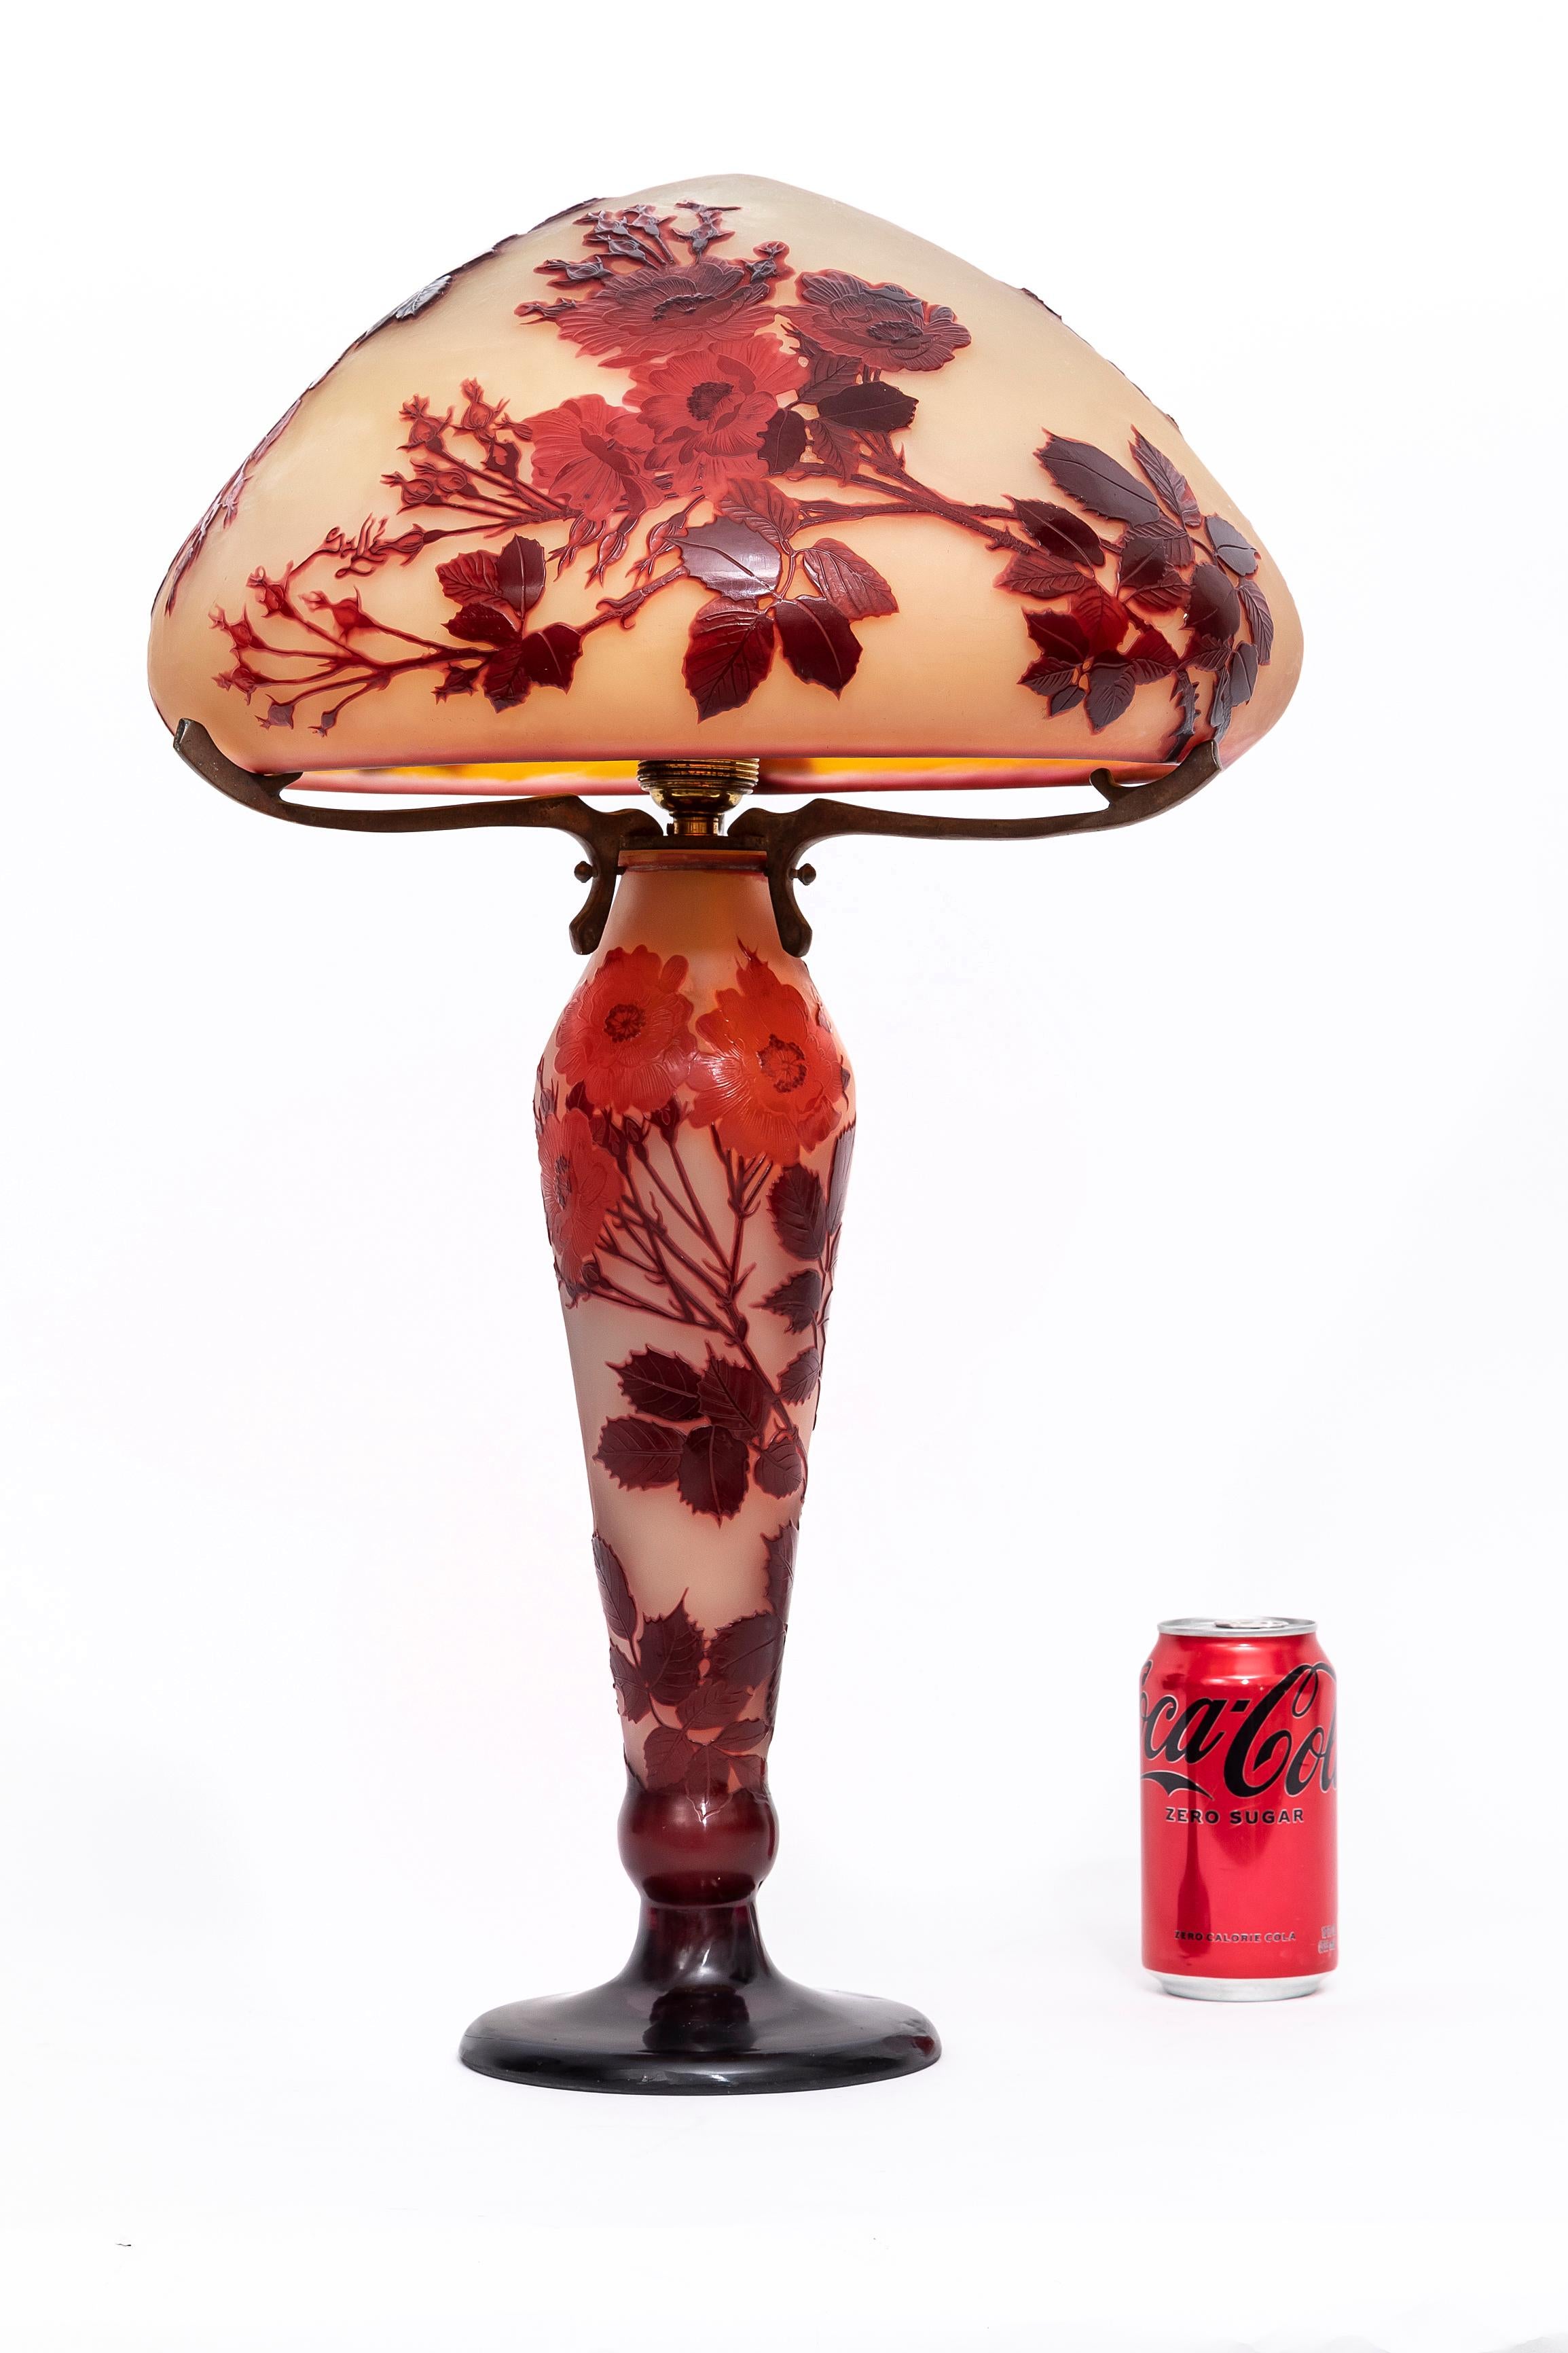 A Magnificent and Rare Antique French Galle Signed Cut-Cameo Lamp with Original Signed Galle Cut-Cameo Shade, in Red and Yellow Sunset Colors.  This floral motif Galle lamp is made in the art nouveau style with two-toned deep red flowers on a base